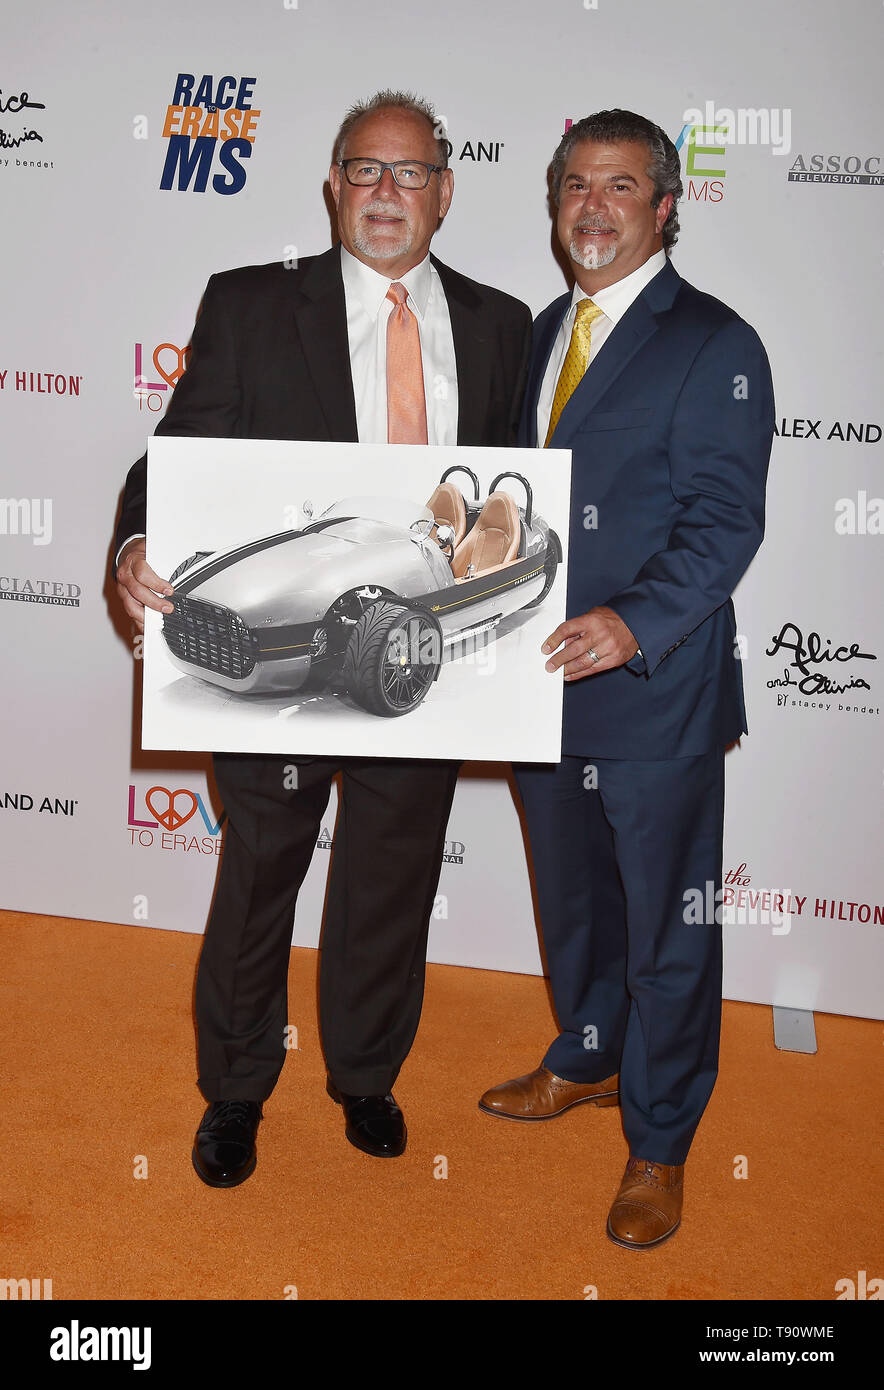 BEVERLY HILLS, CA - MAY 10: Jeff Whaley and Jerome Vassallo attend the 26th Annual Race to Erase MS Gala at The Beverly Hilton Hotel on May 10, 2019 in Beverly Hills, California. Stock Photo